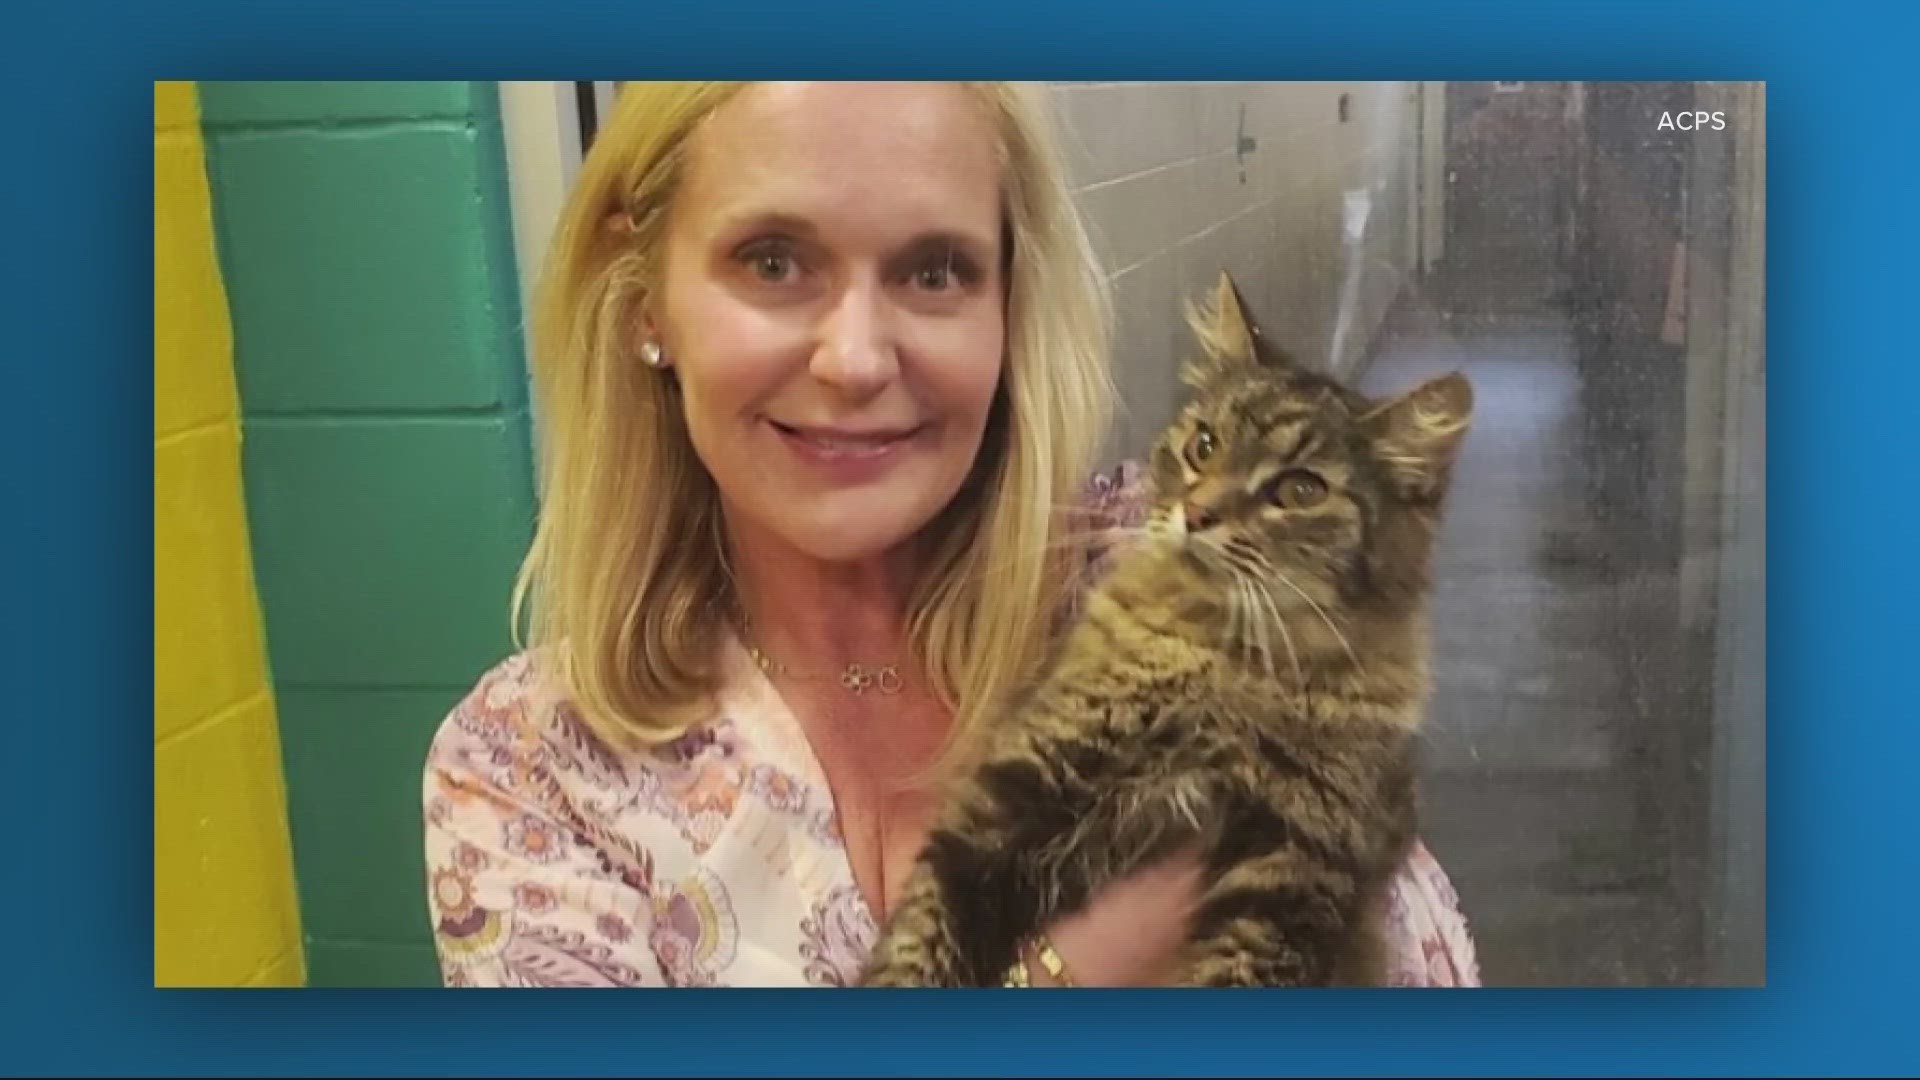 A lost cat is finally back with its owners in Jacksonville after 11 years thanks to some investigative techniques and some luck.